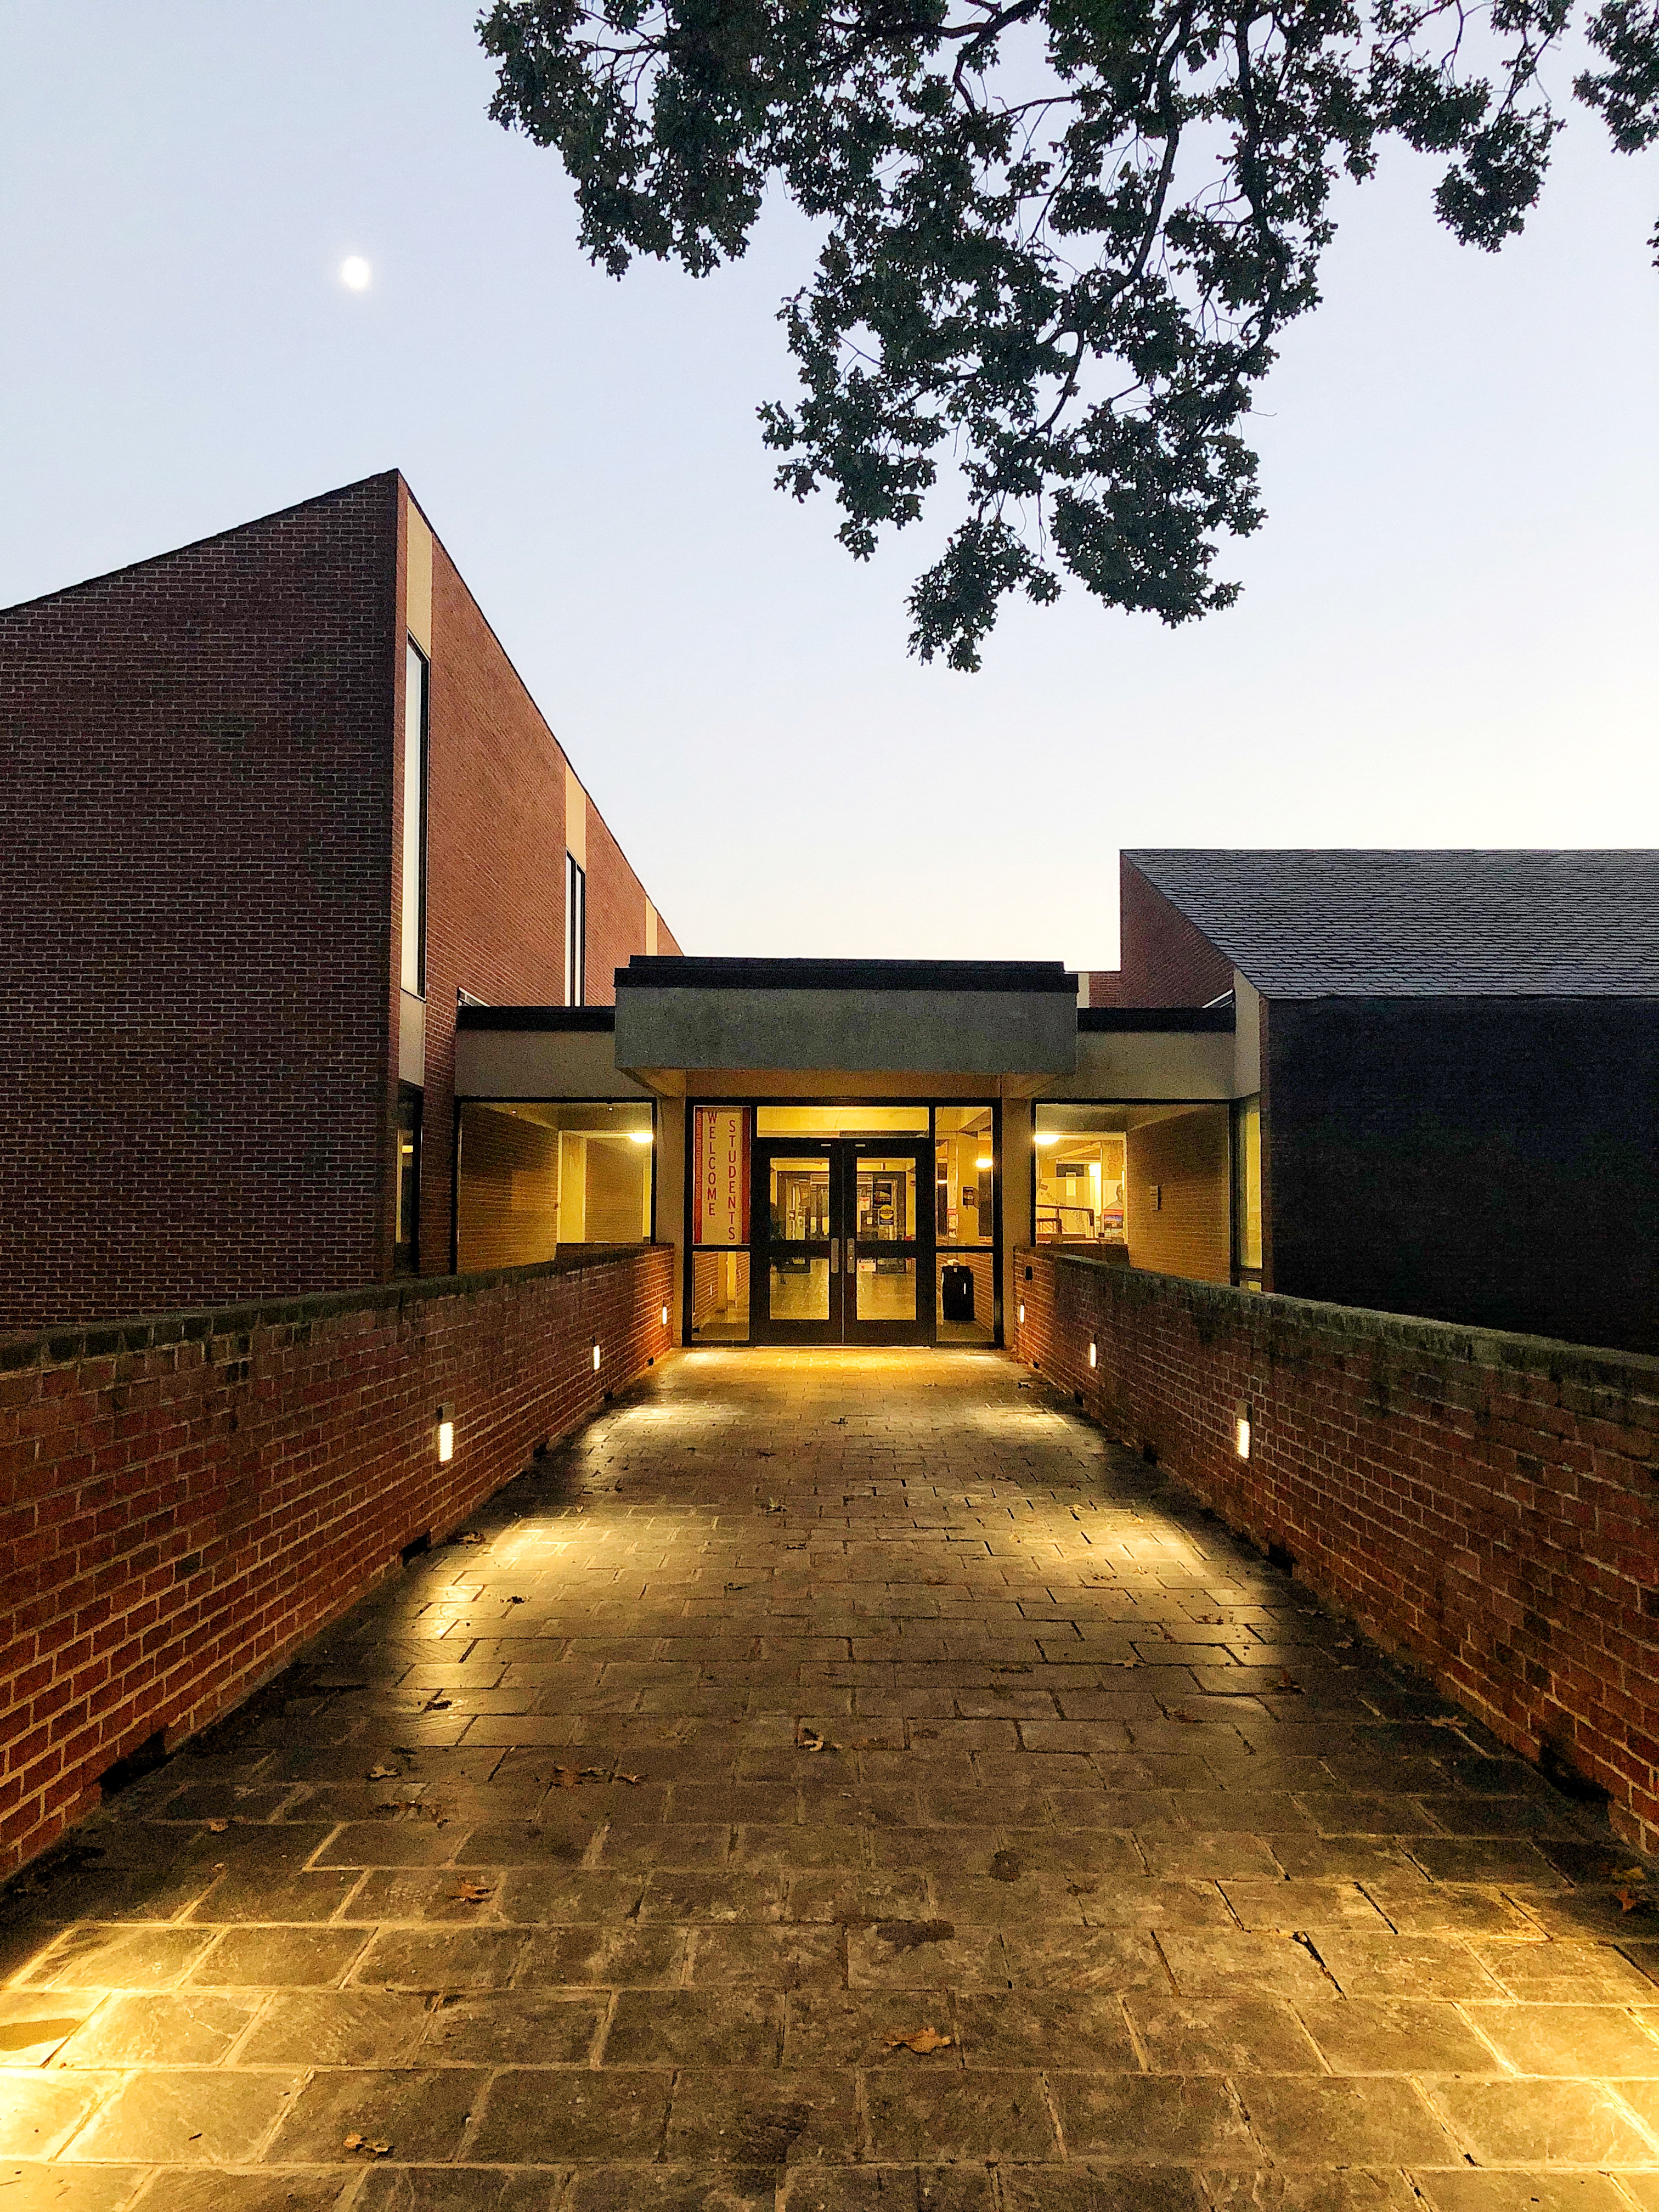 UMD Architecture Building at twilight. Photo by Betsy Nolen Petrusic.